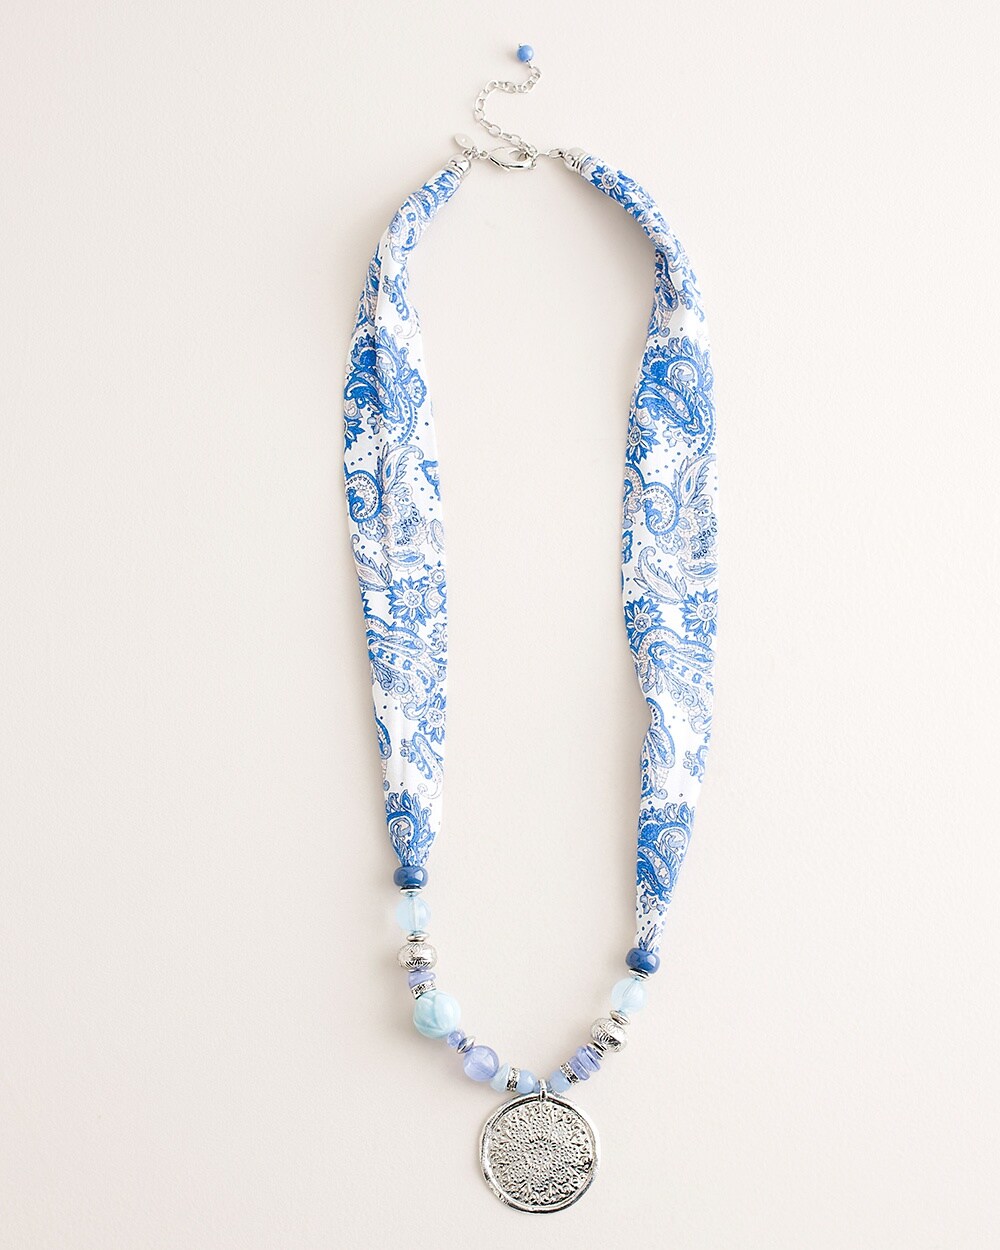 Blue and White Printed Scarf Pendant Necklace